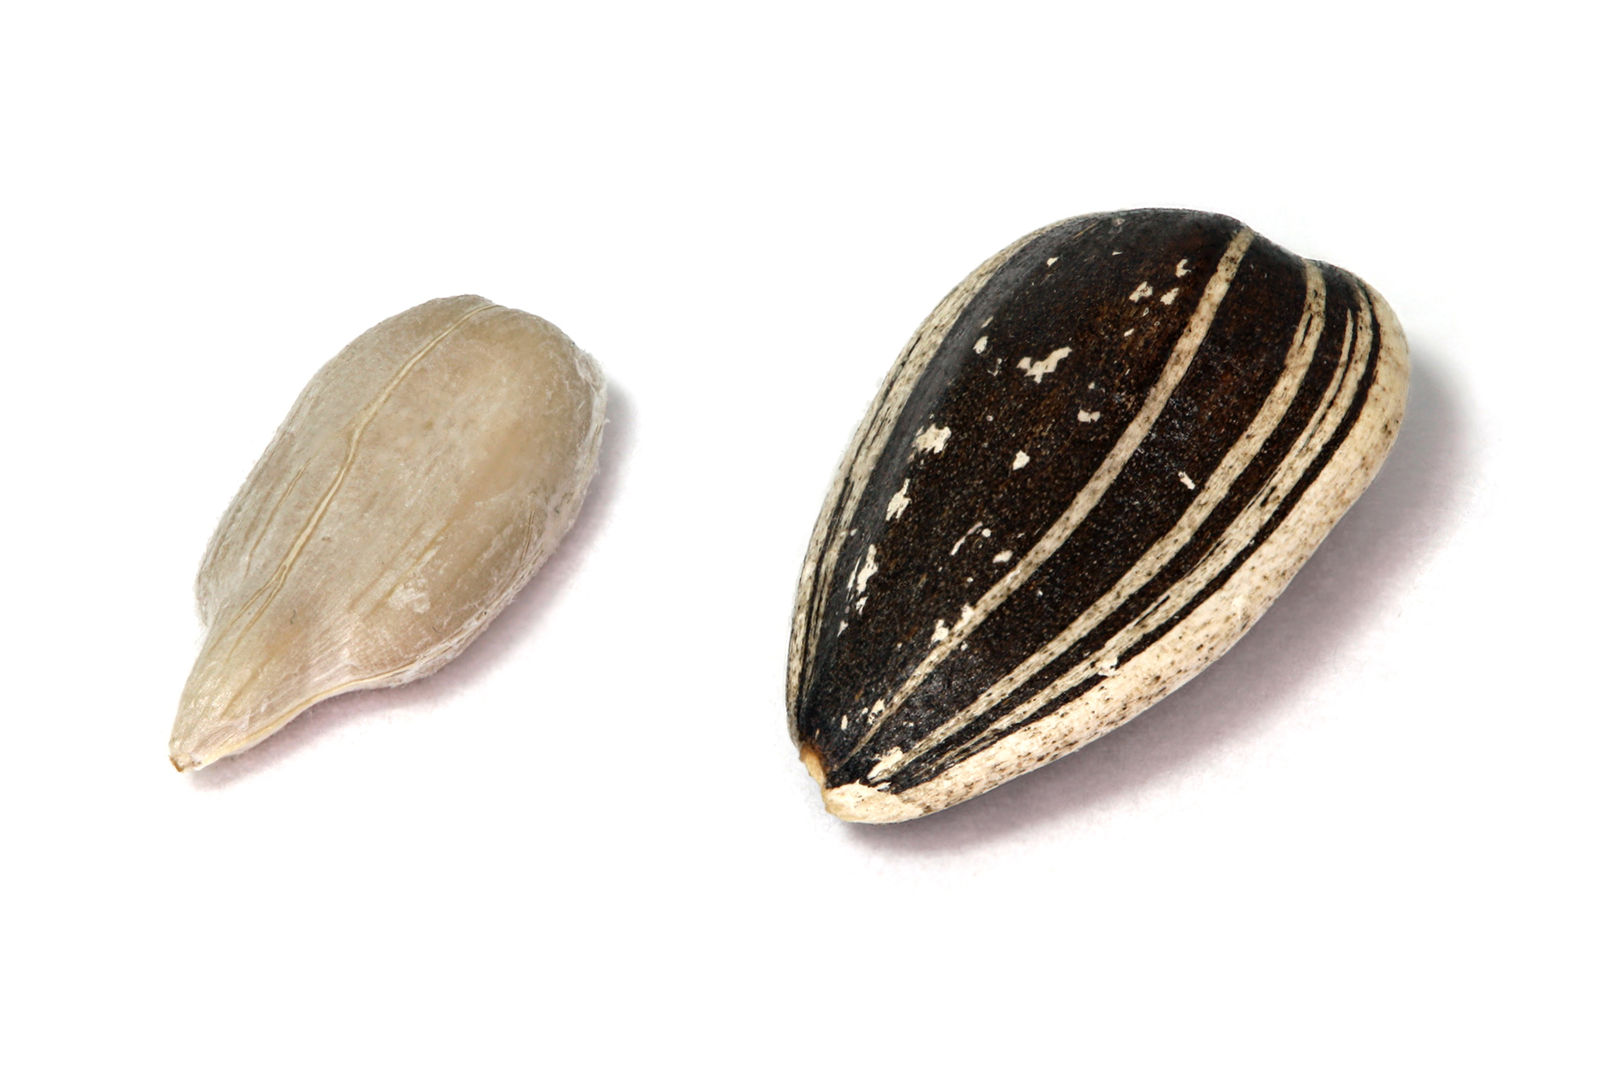 A sunflower seed is smaller and white shown on the left, and the entire sunflower fruit on the right. The fruit is black with white lines.